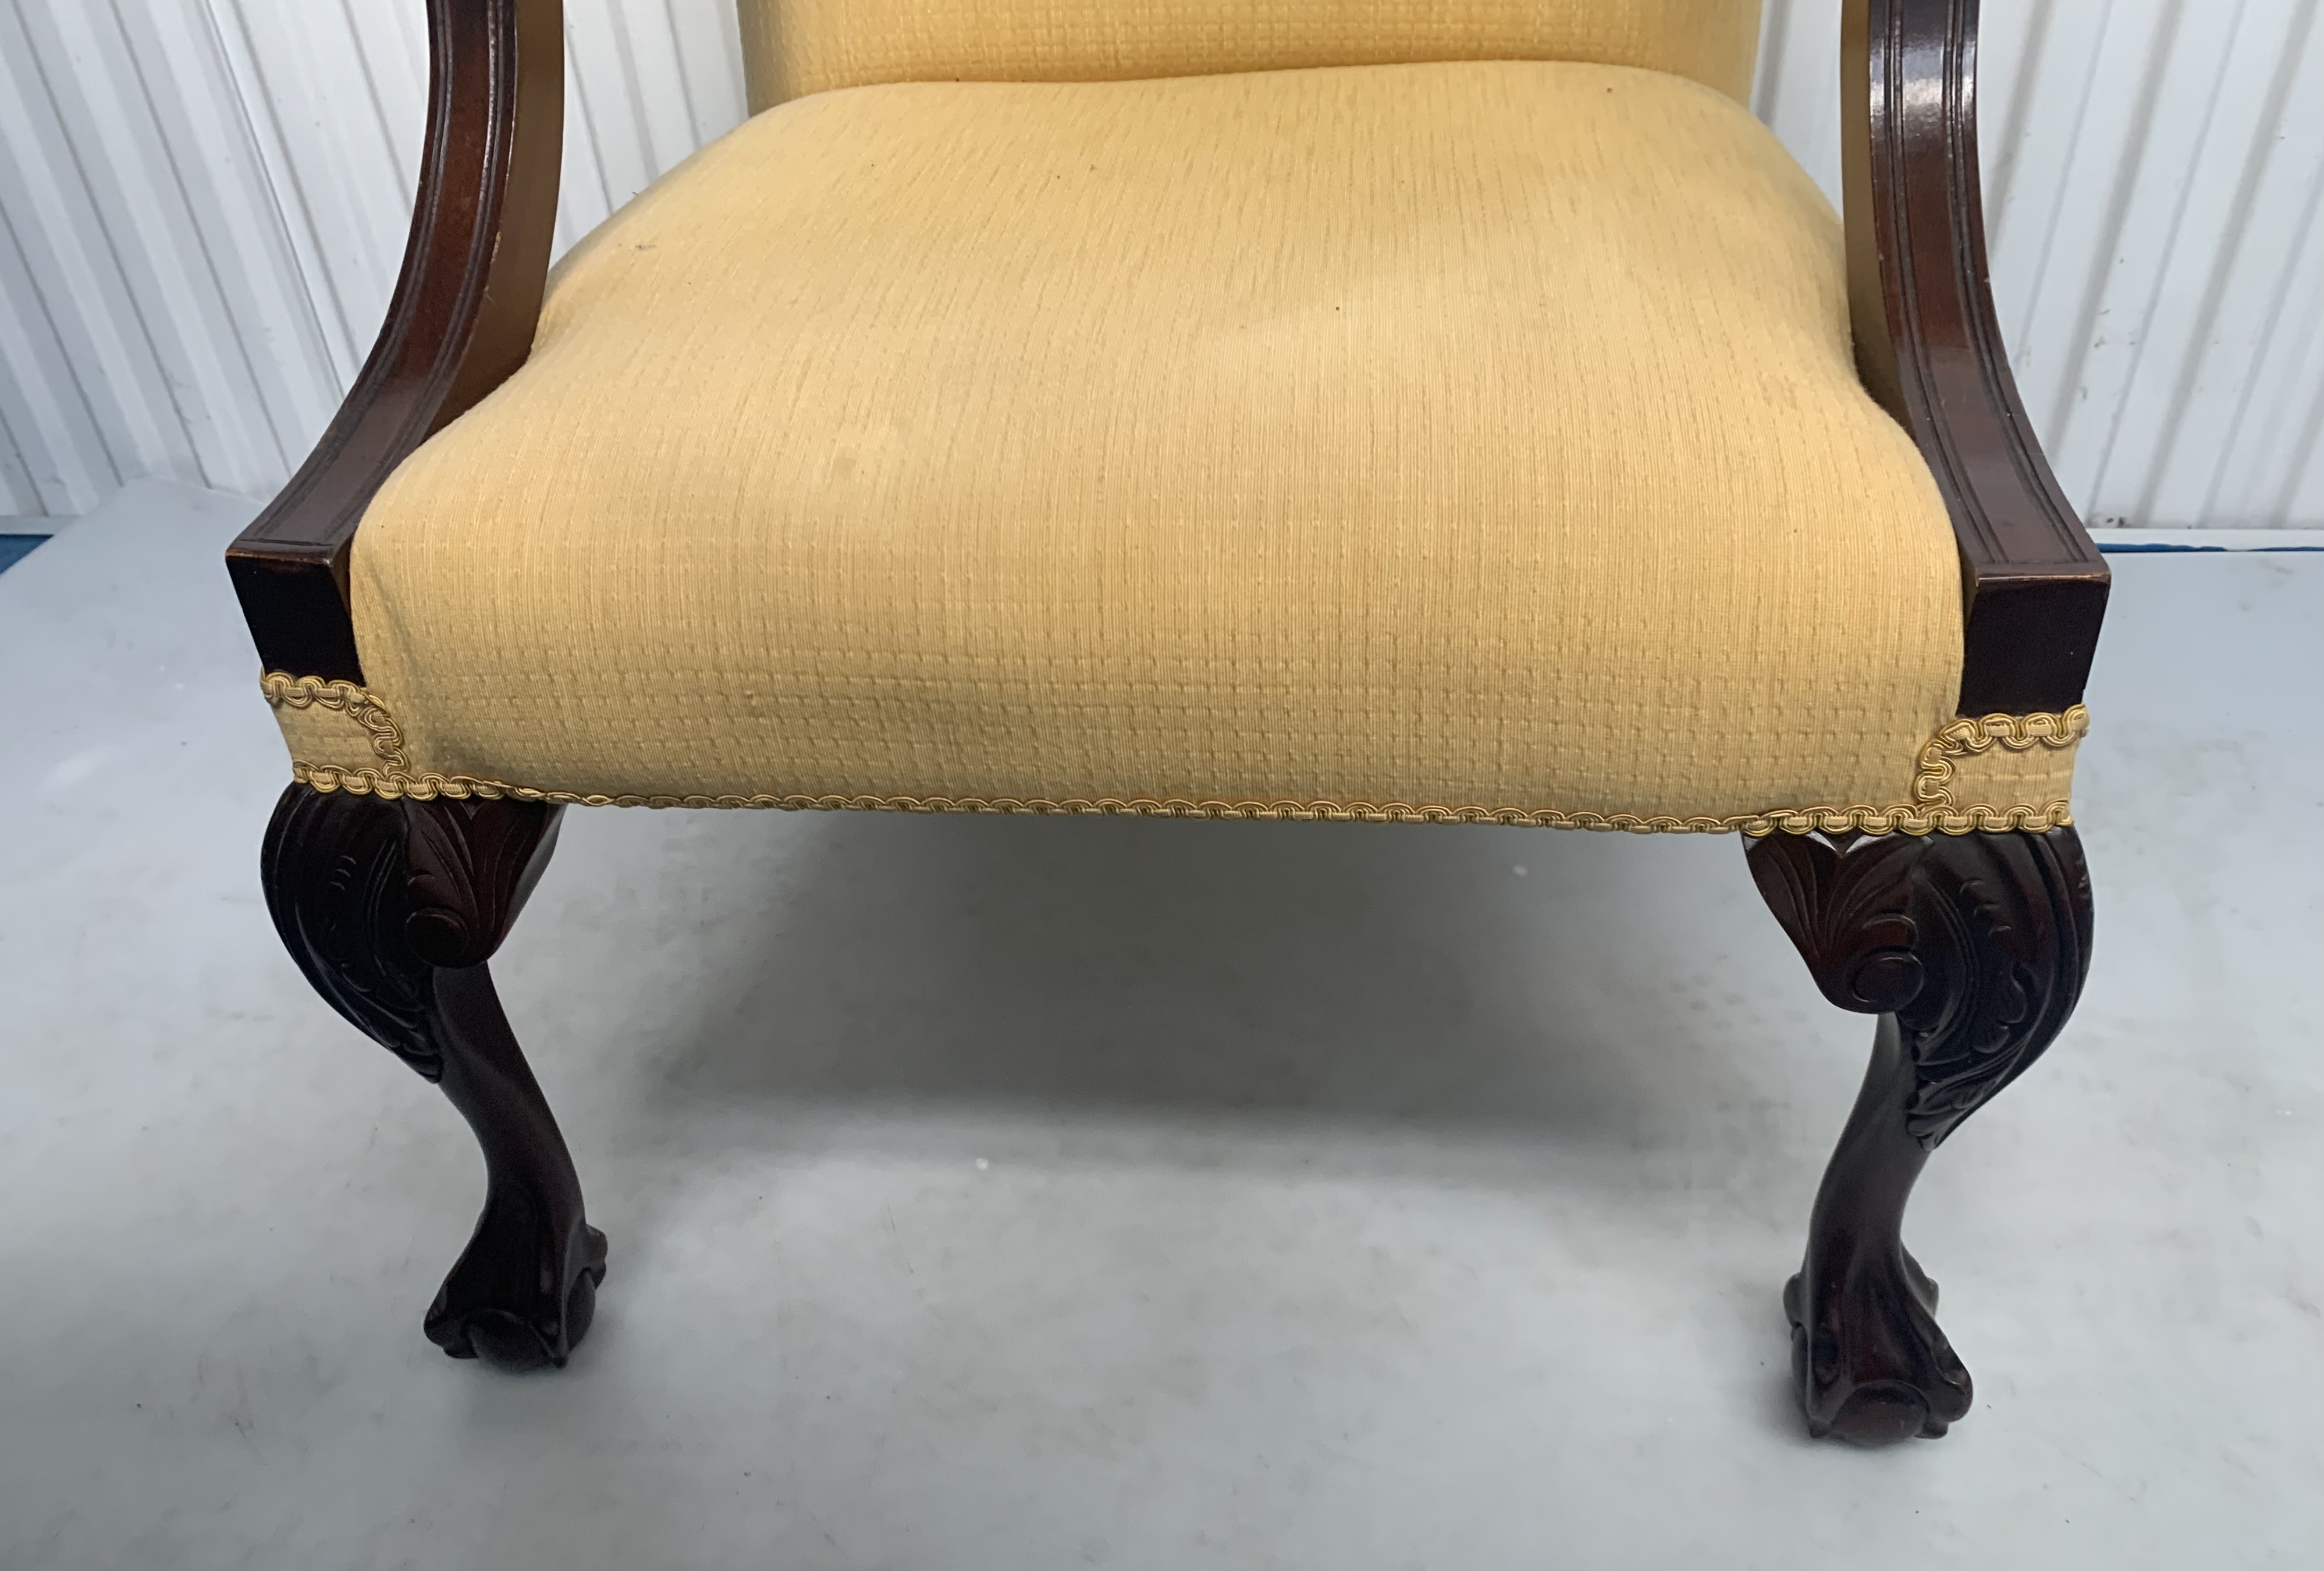 Antique upholstered armchair - Image 2 of 7